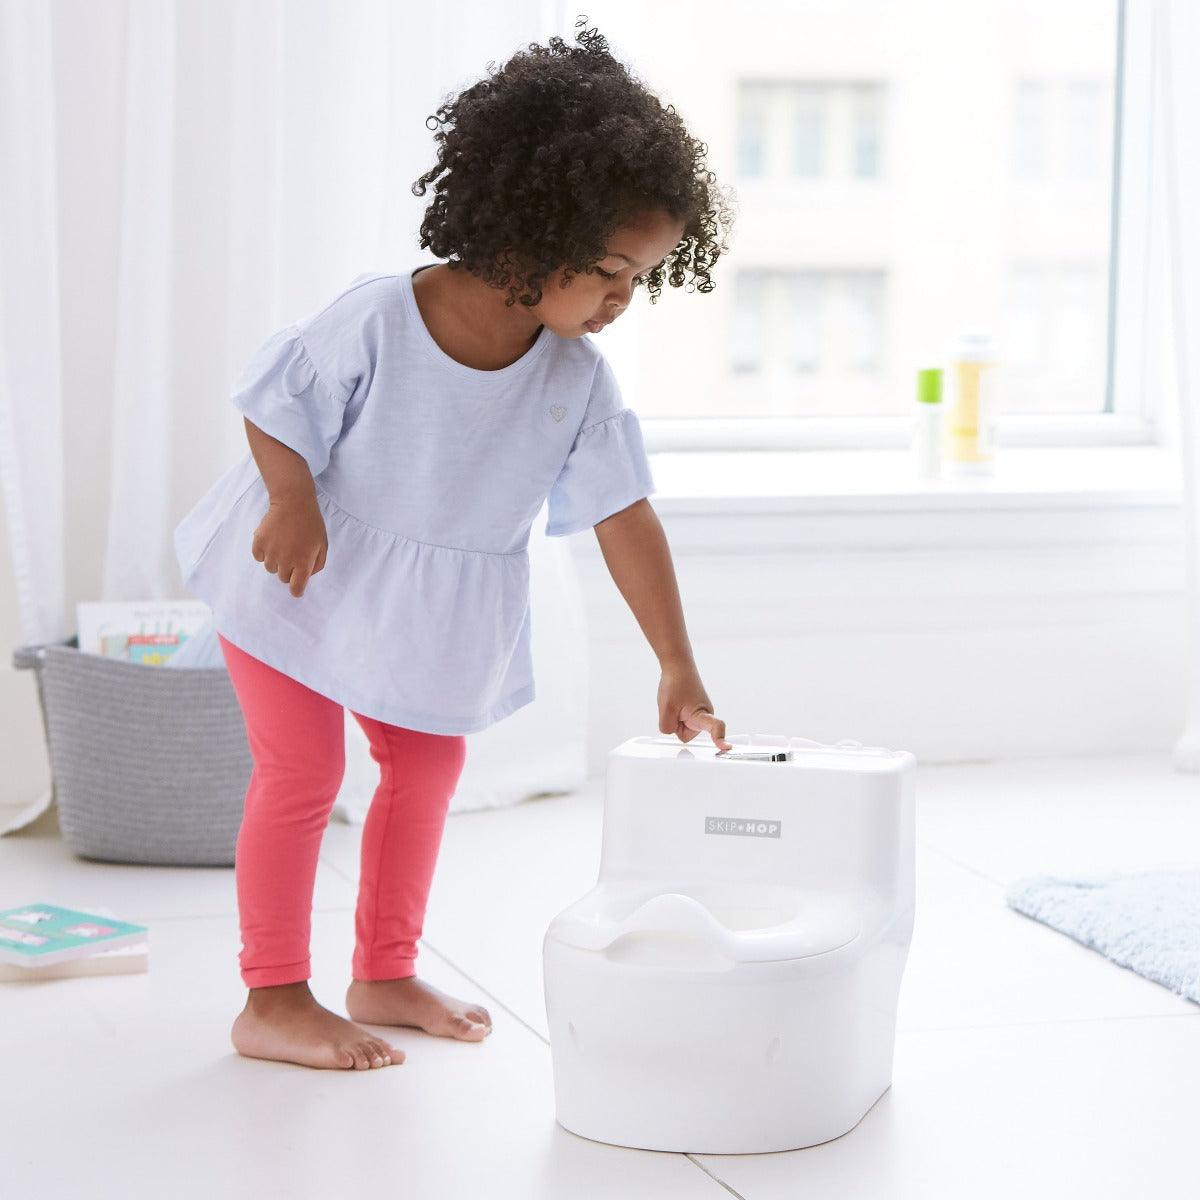 Skip Hop Made For Me Potty White - Potty Training For Ages 2-4 Years